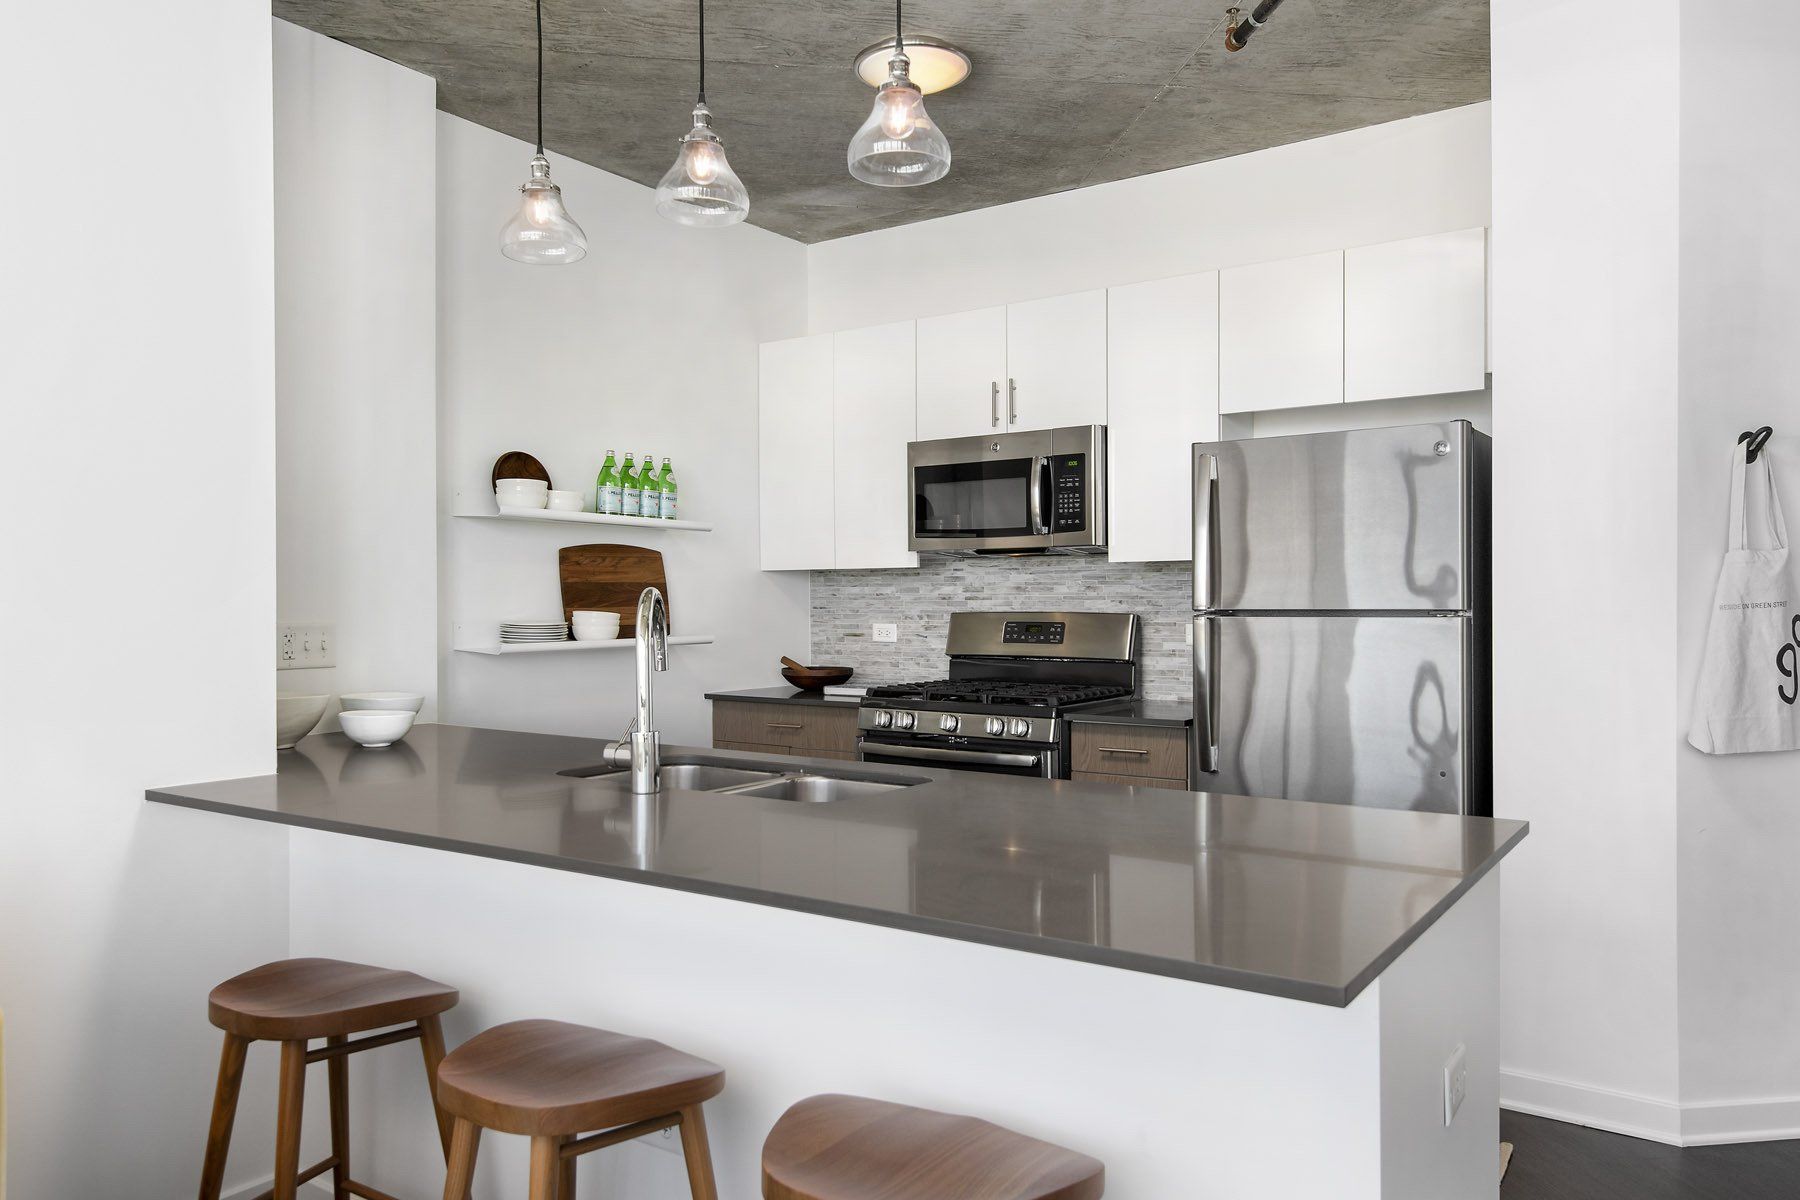 A kitchen with white cabinets and stools and a stainless steel refrigerator  at Reside on Green Street.